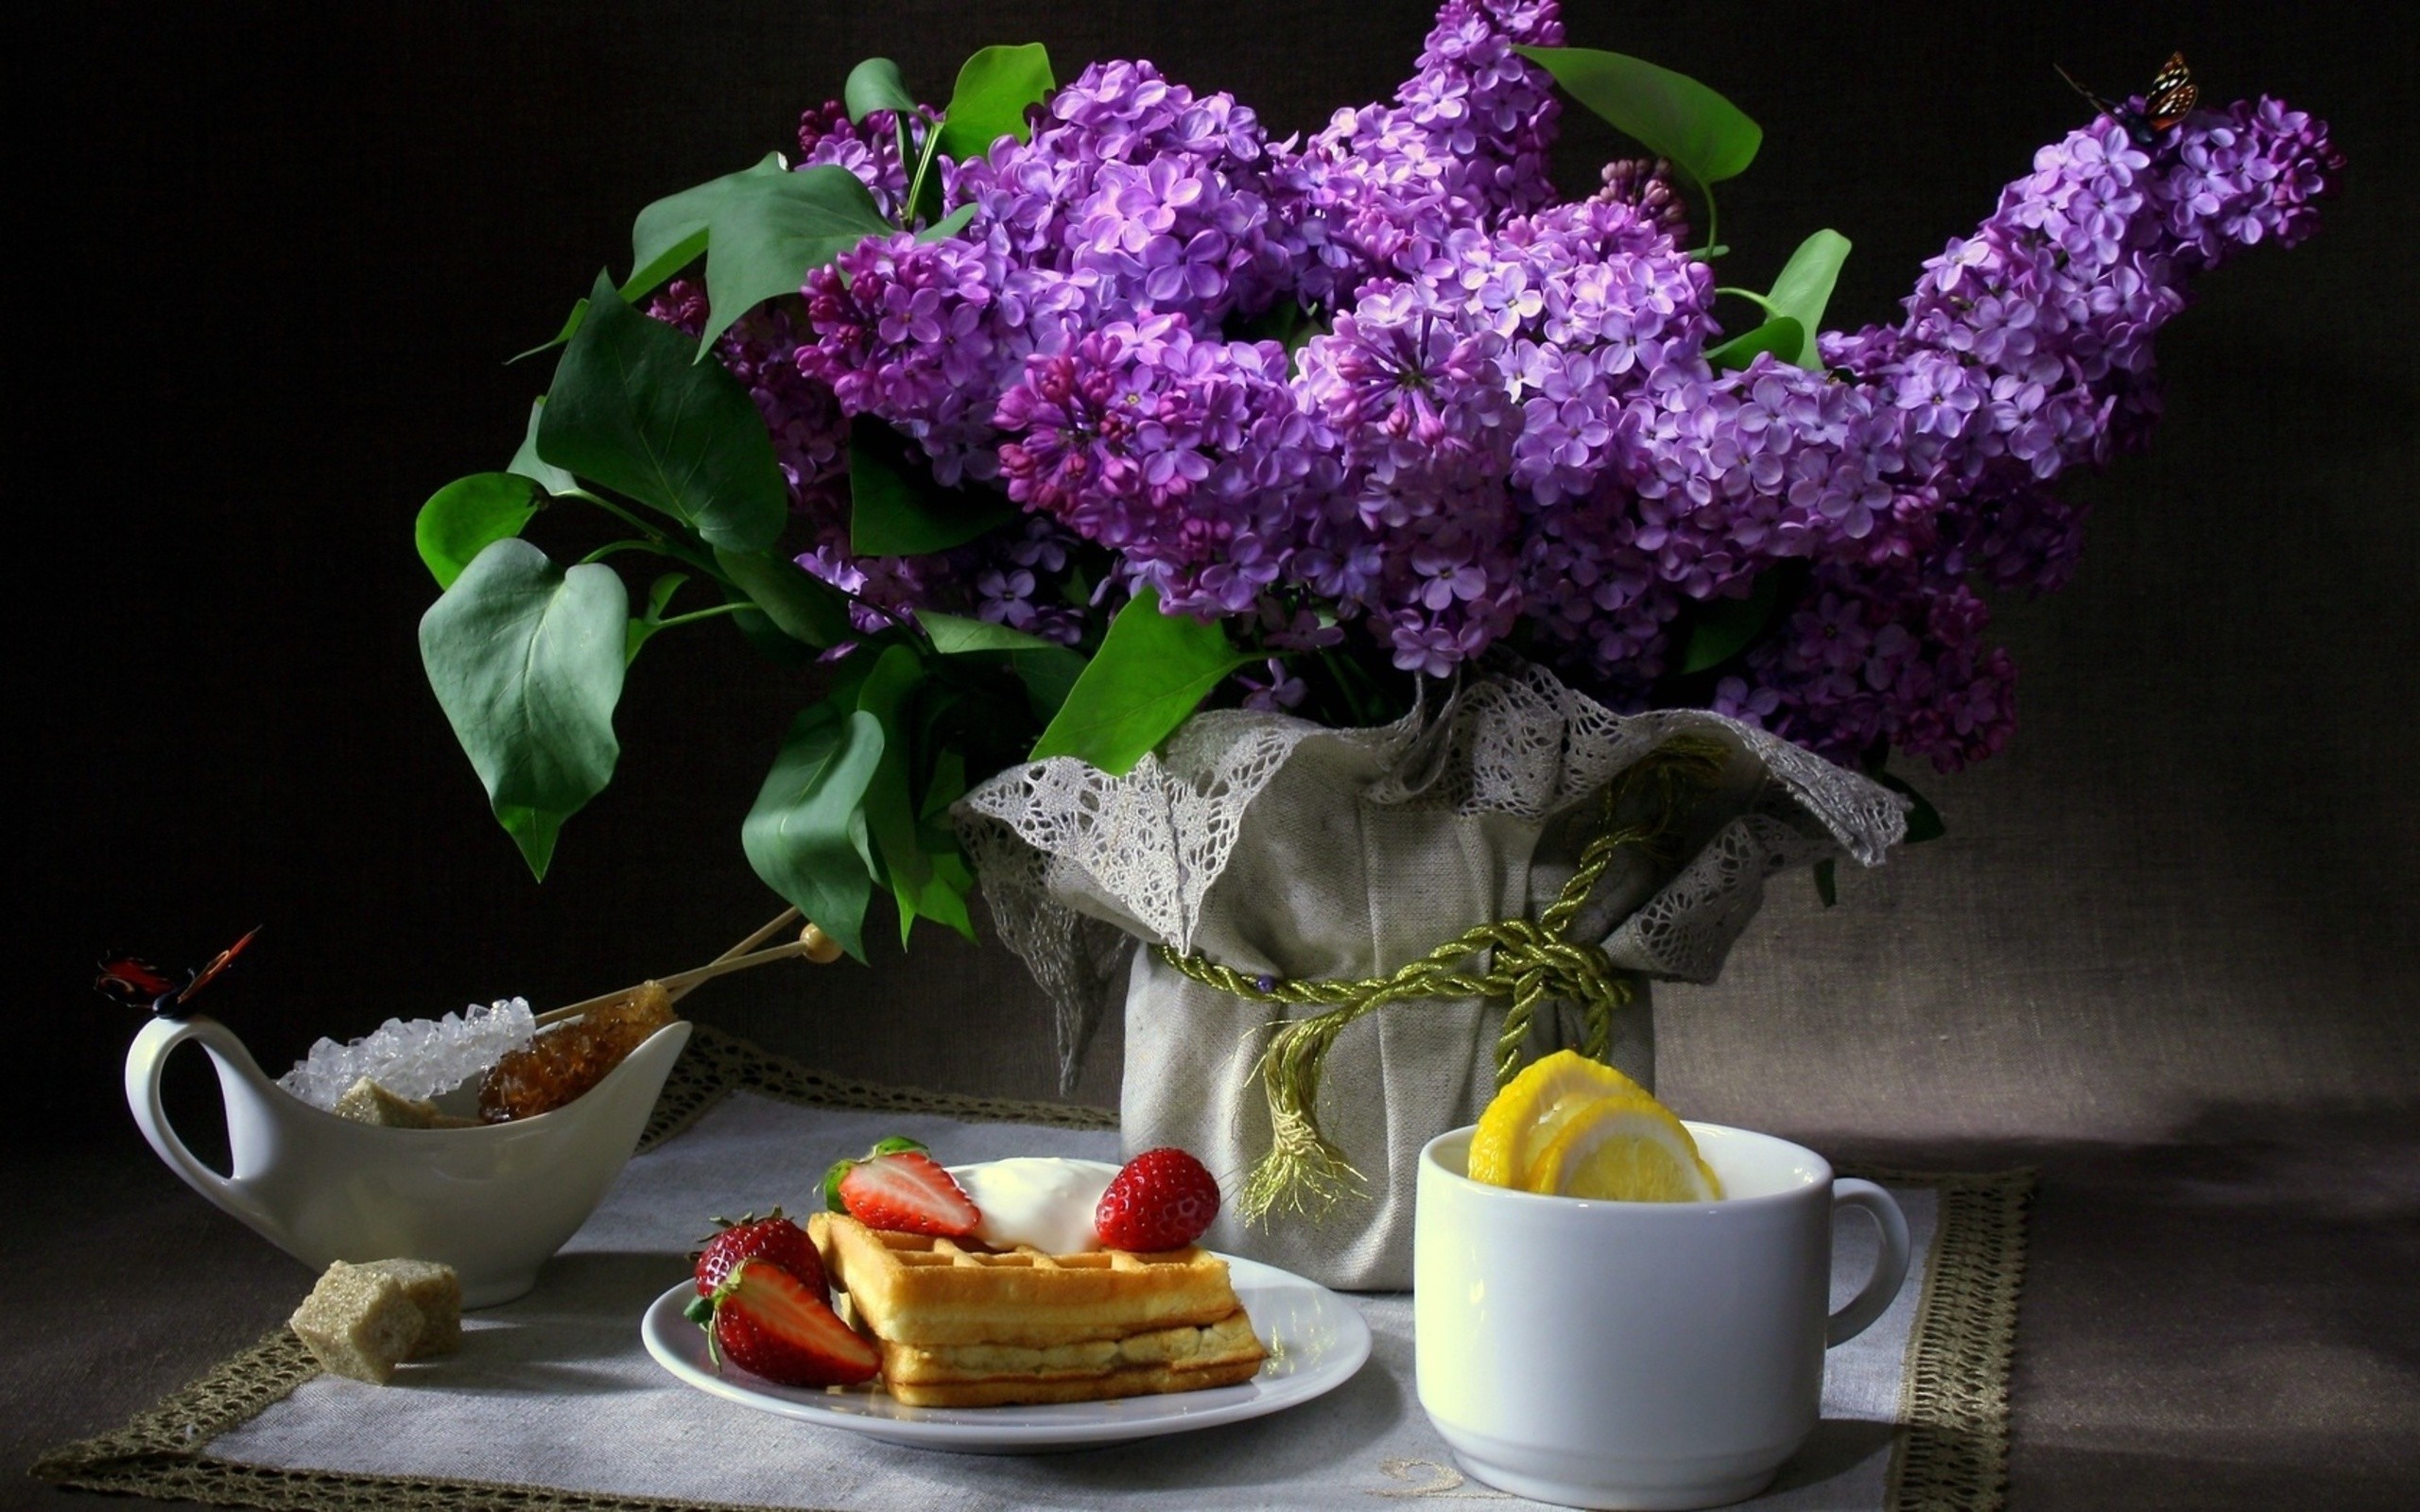 General 2560x1600 flowers food cup strawberries purple flowers lilac still life sweets berries waffles simple background black background plants